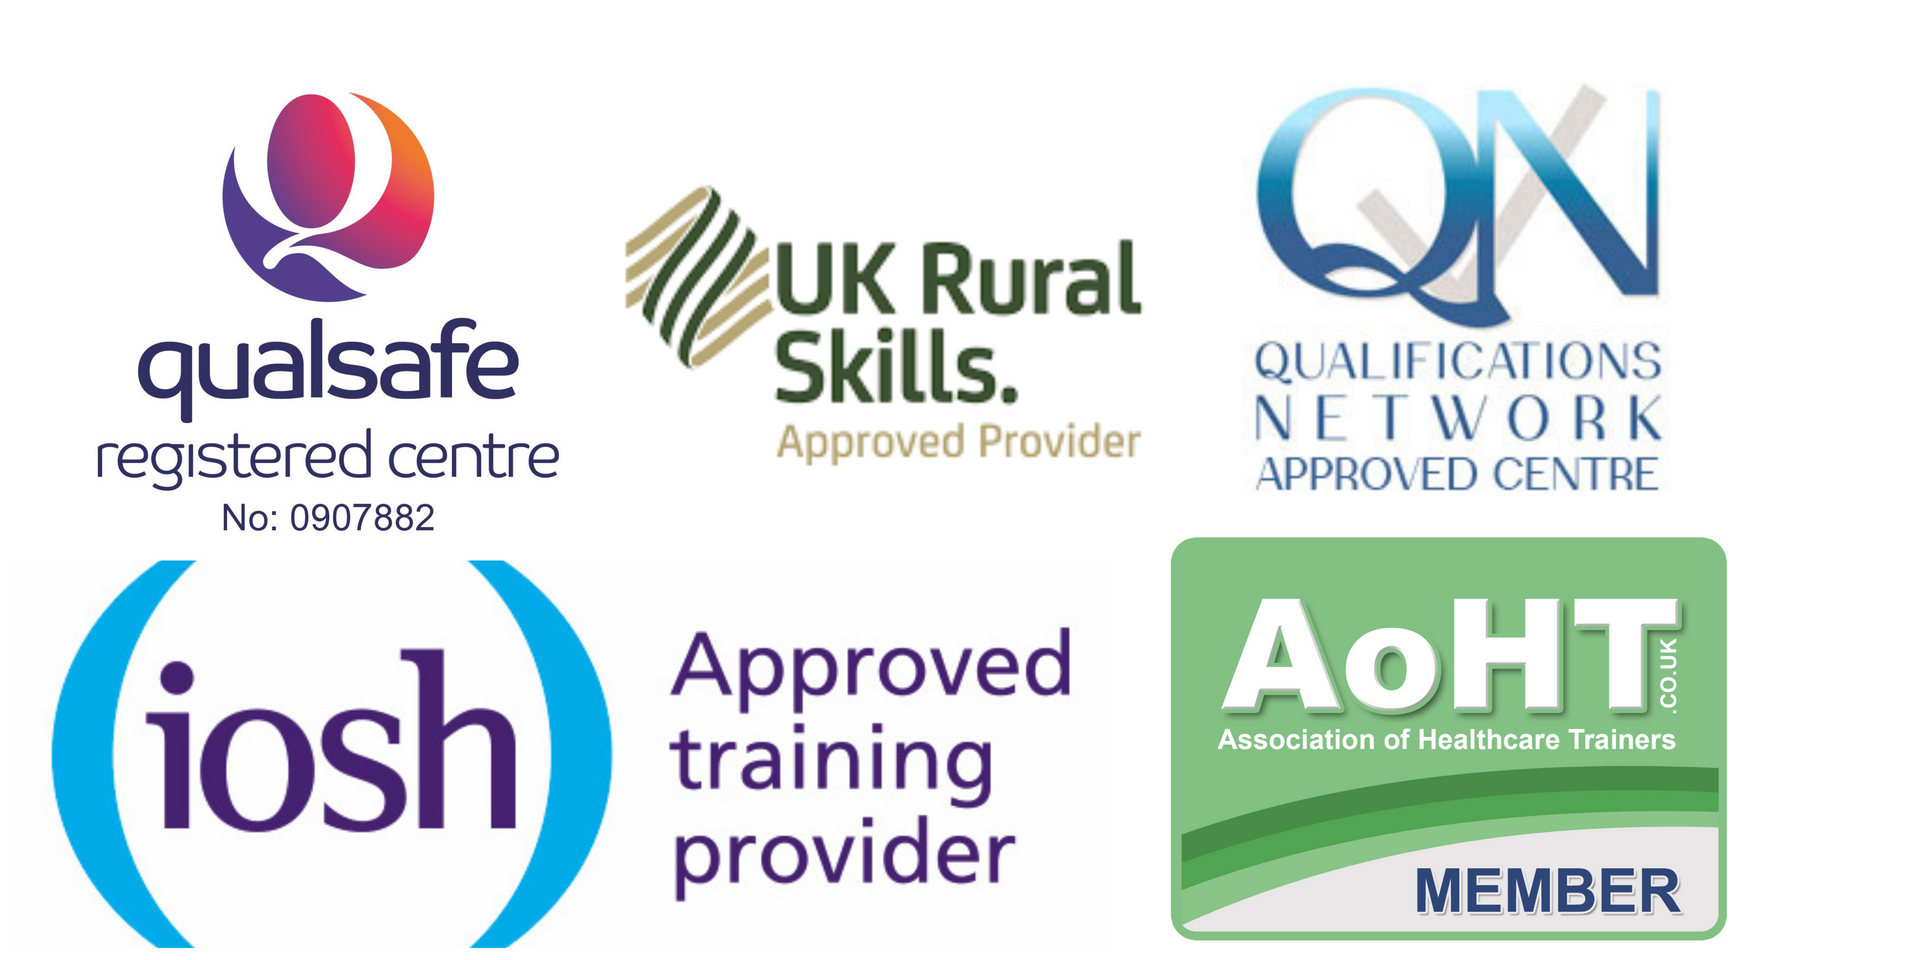 Qualifications network approved centre, AOHT member